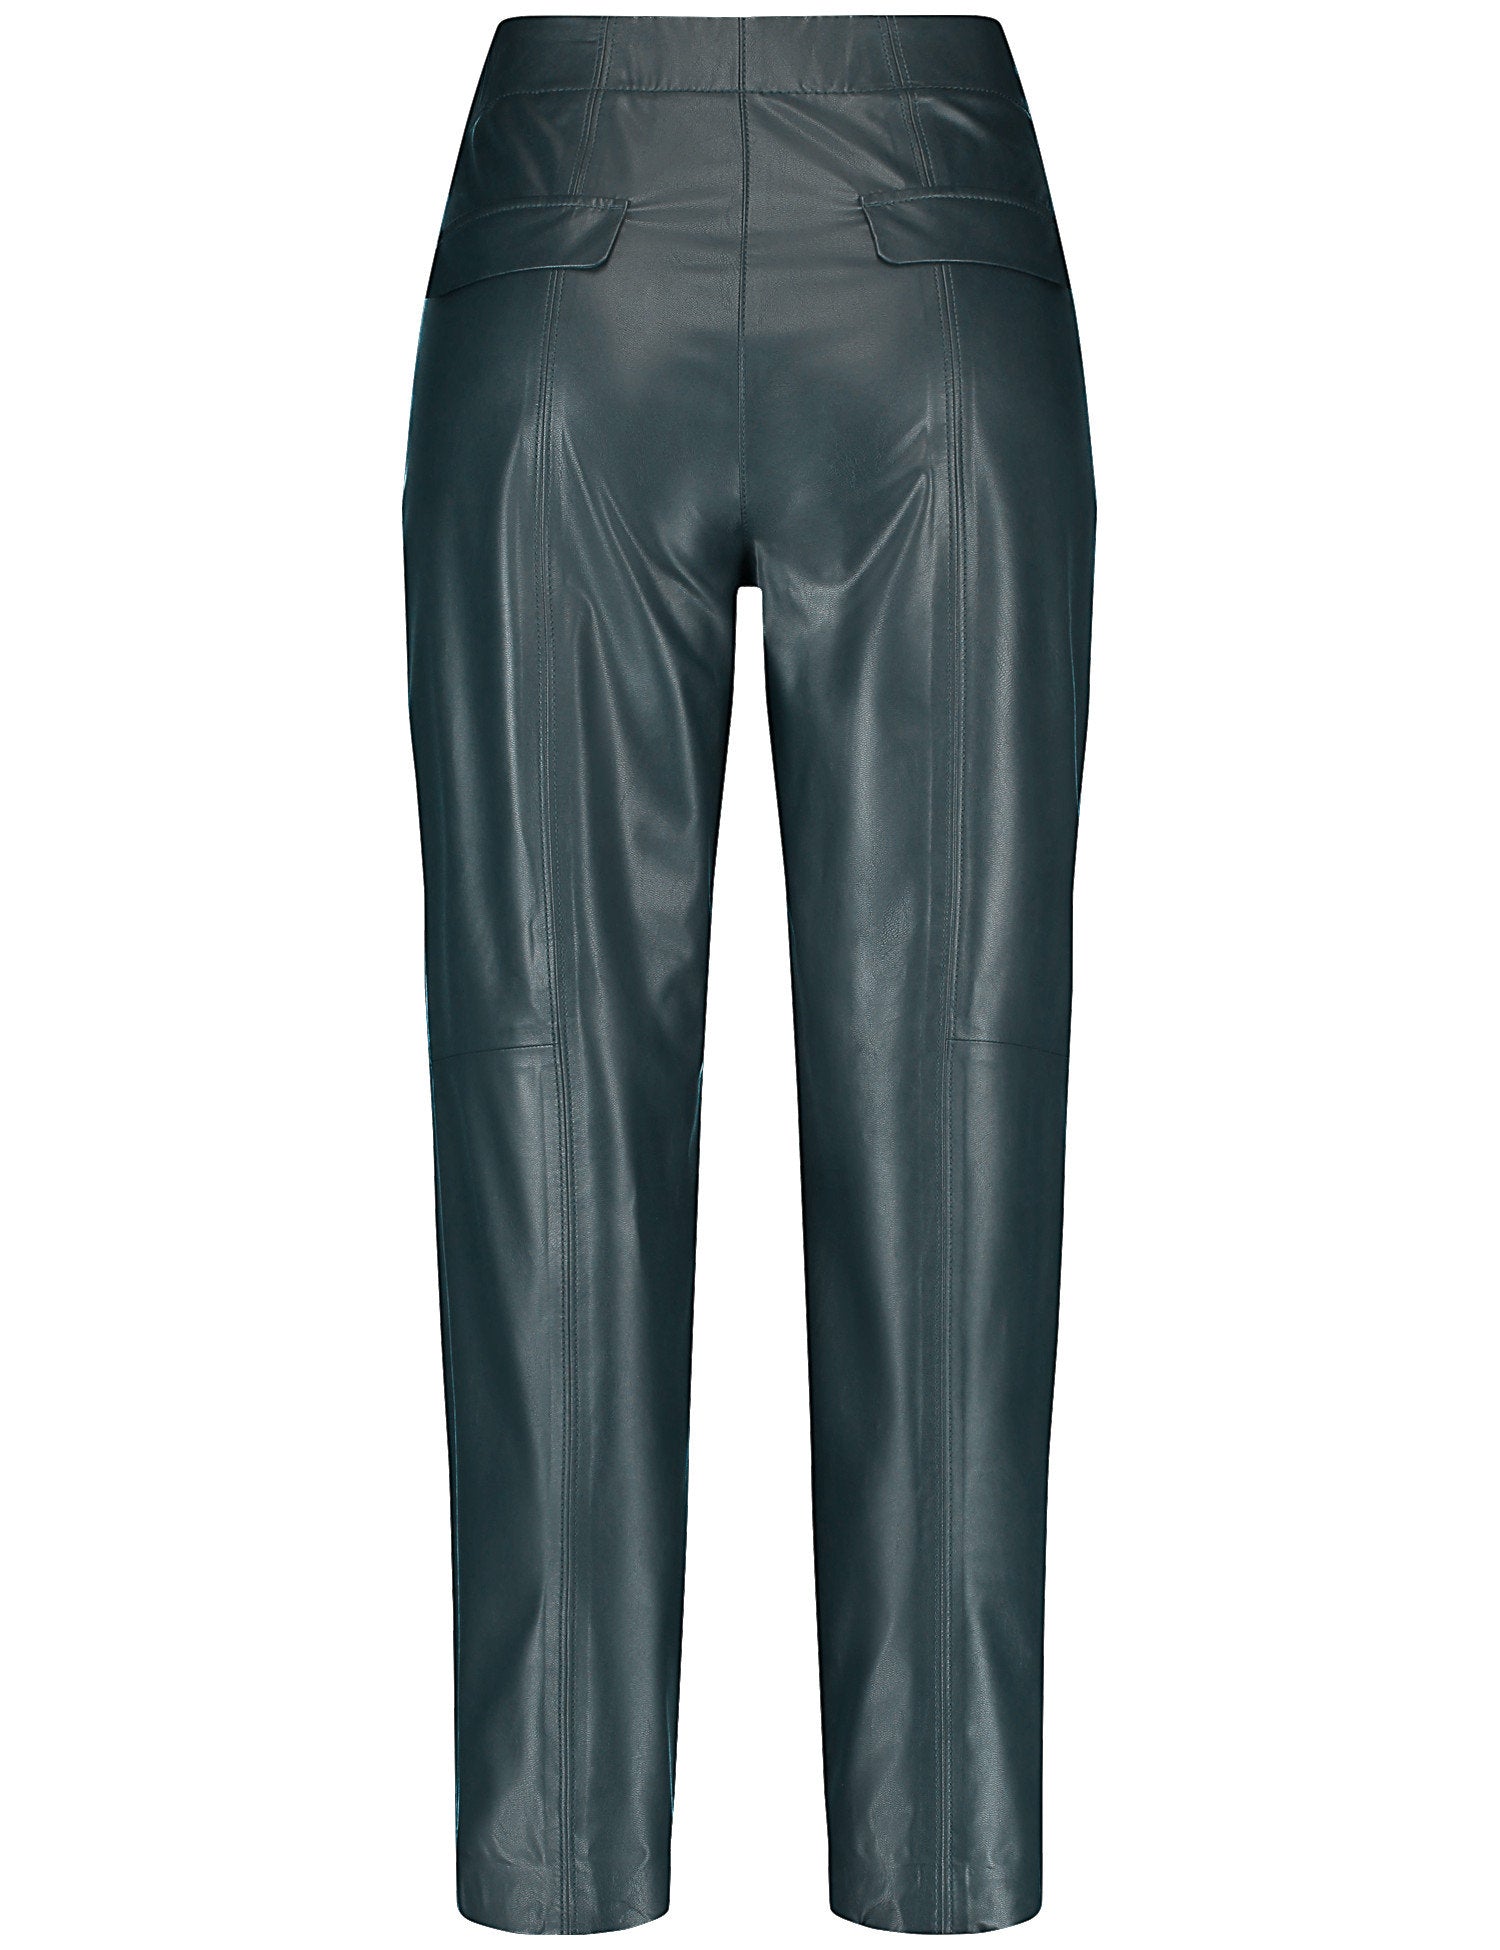 Fashionable 7-8-Length Faux Leather Trousers_220031-31223_50939_02